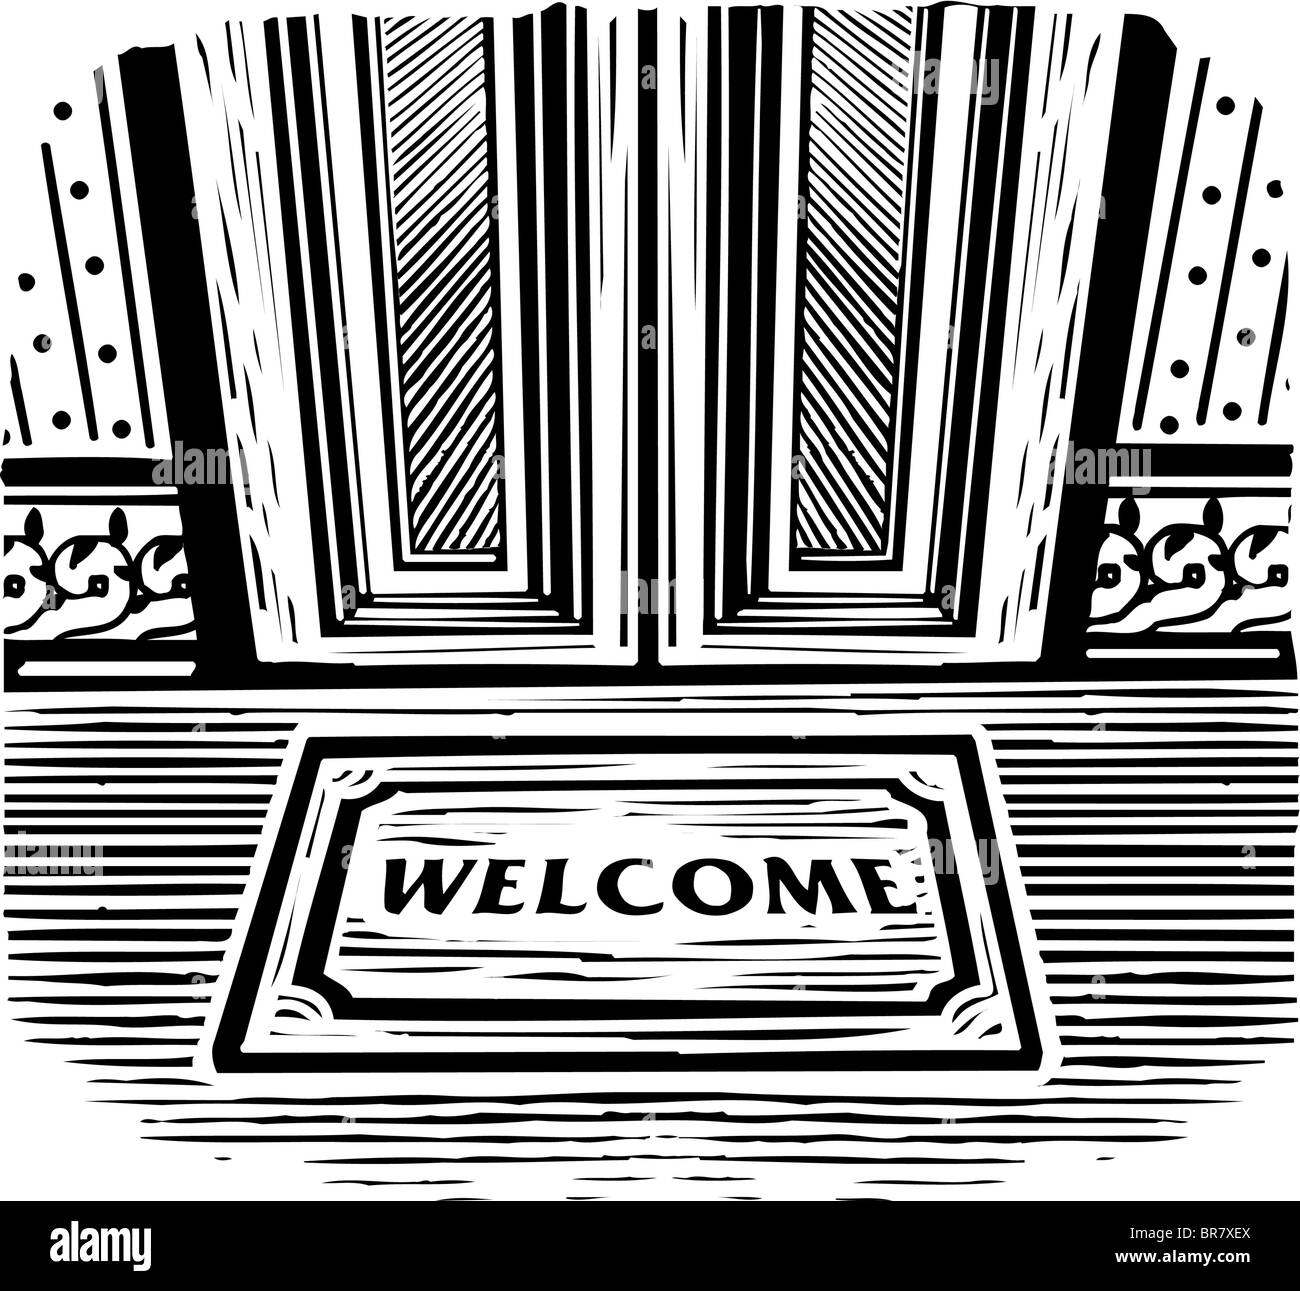 https://c8.alamy.com/comp/BR7XEX/welcome-mat-in-front-of-a-door-black-and-white-BR7XEX.jpg